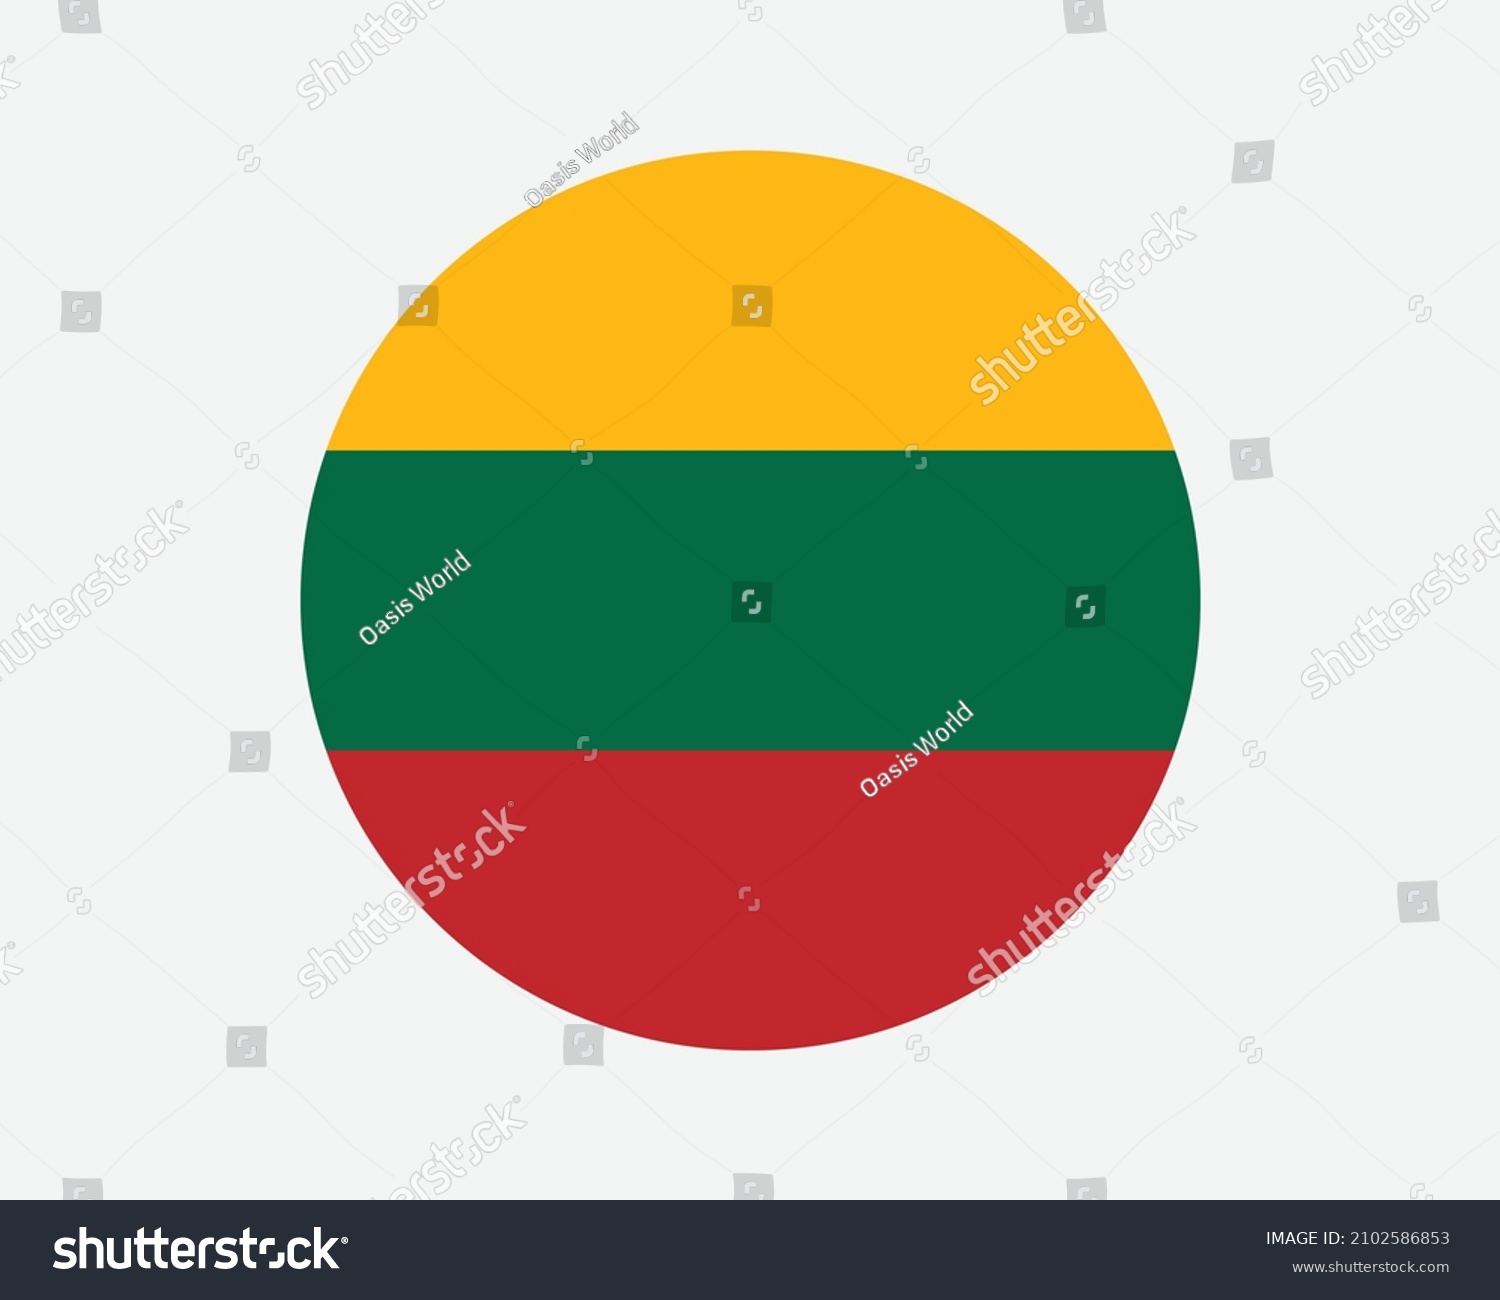 SVG of Lithuania Round Country Flag. Lithuanian Circle National Flag. Republic of Lithuania Circular Shape Button Banner. EPS Vector Illustration. svg